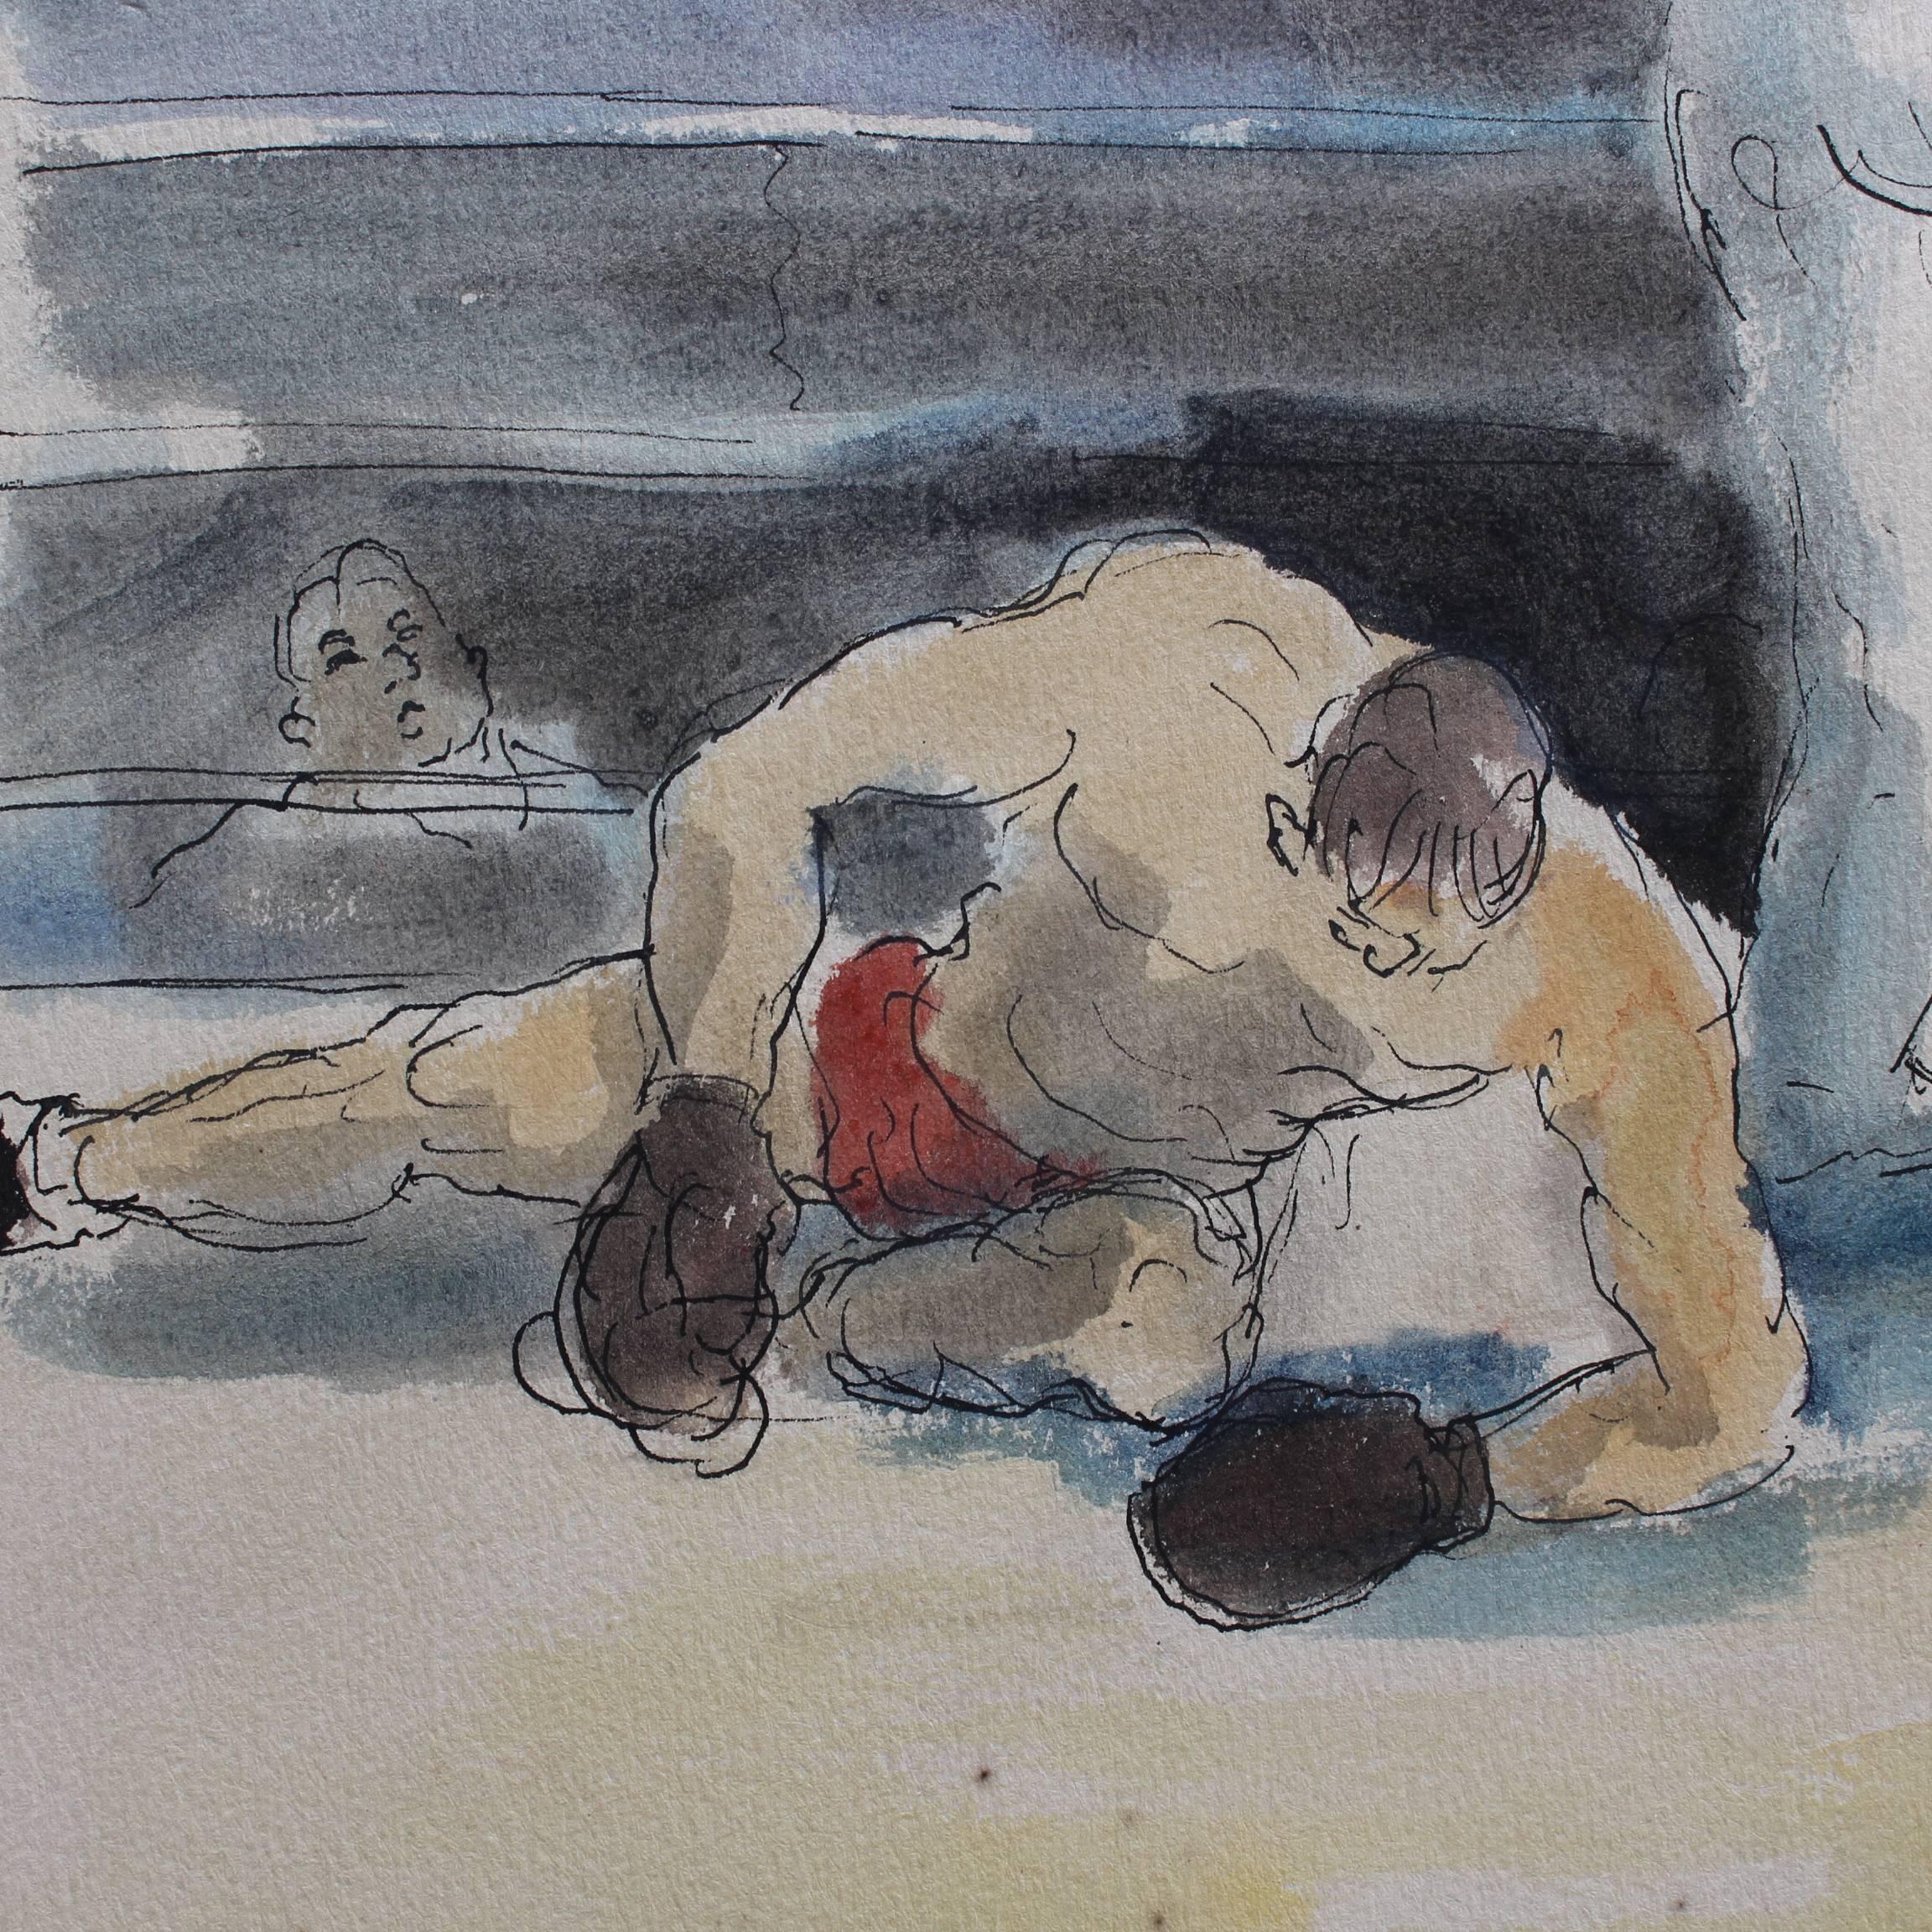 'Les Boxeurs II - Combat de Boxe' (c. 1940s), ink and watercolour on paper, by Pierre Ambrogiani (1907 - 1985). One boxer is down for the count having just collapsed to the ring's canvas after being dealt a solid blow from his opponent. The other,